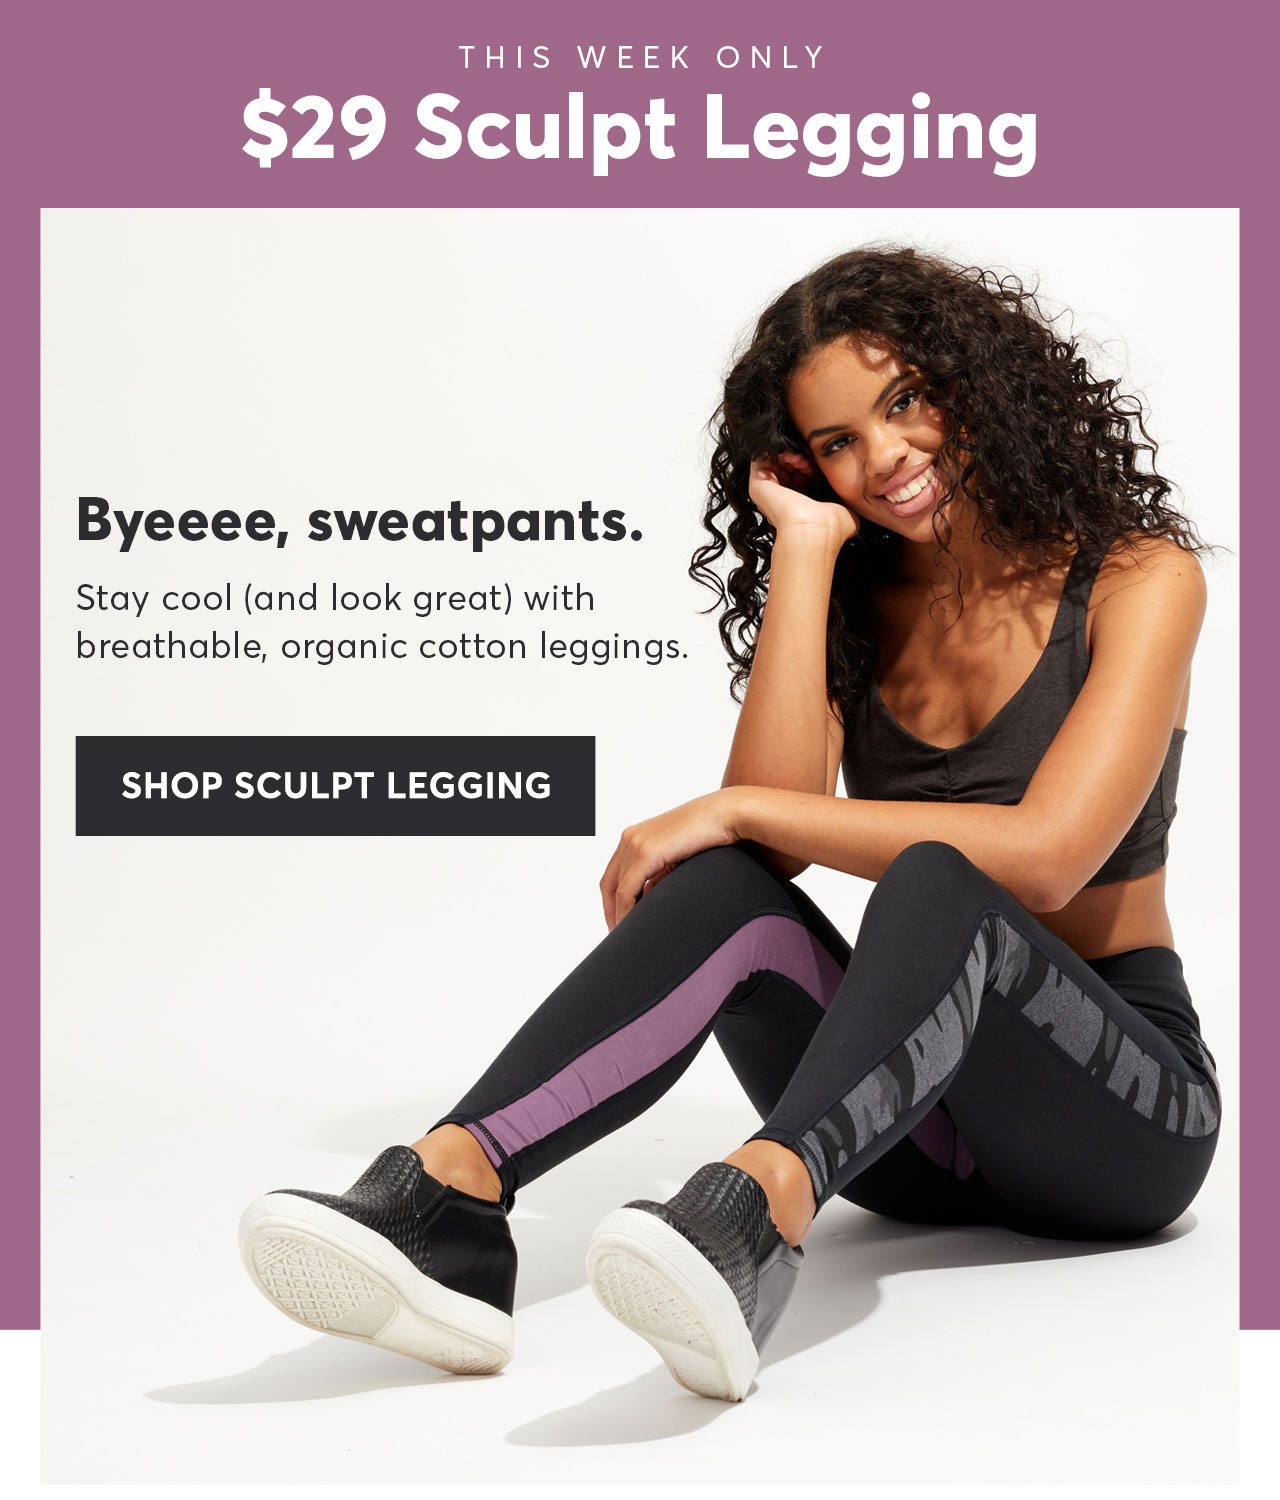 Men's Joggers and Women's Sculpt Leggings are $29 this week only!